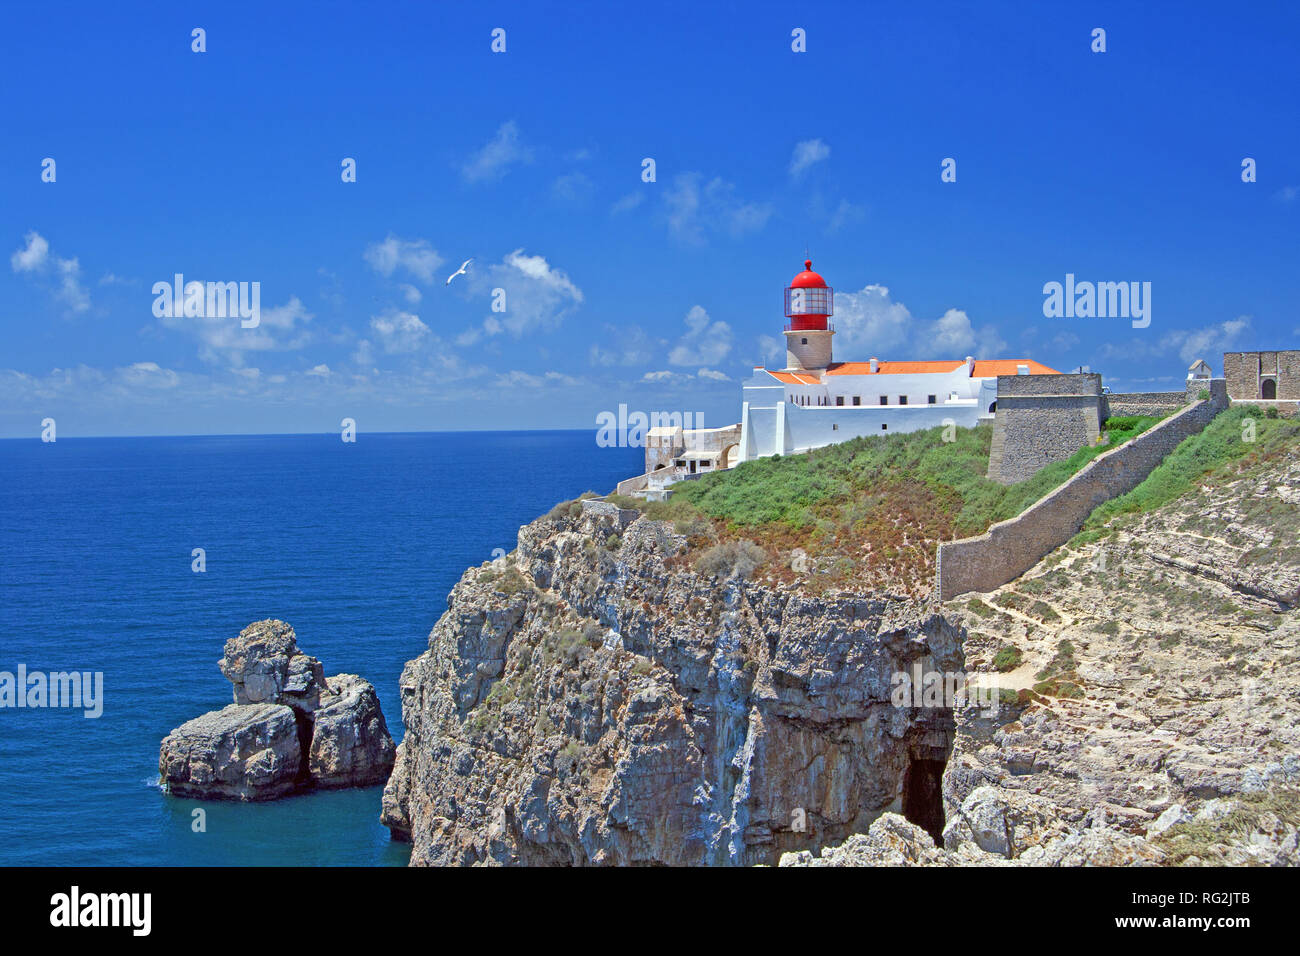 Nice landscape with lighthouse on cliffs in Sagres Portugal westernmost point of europe with blue sky Stock Photo